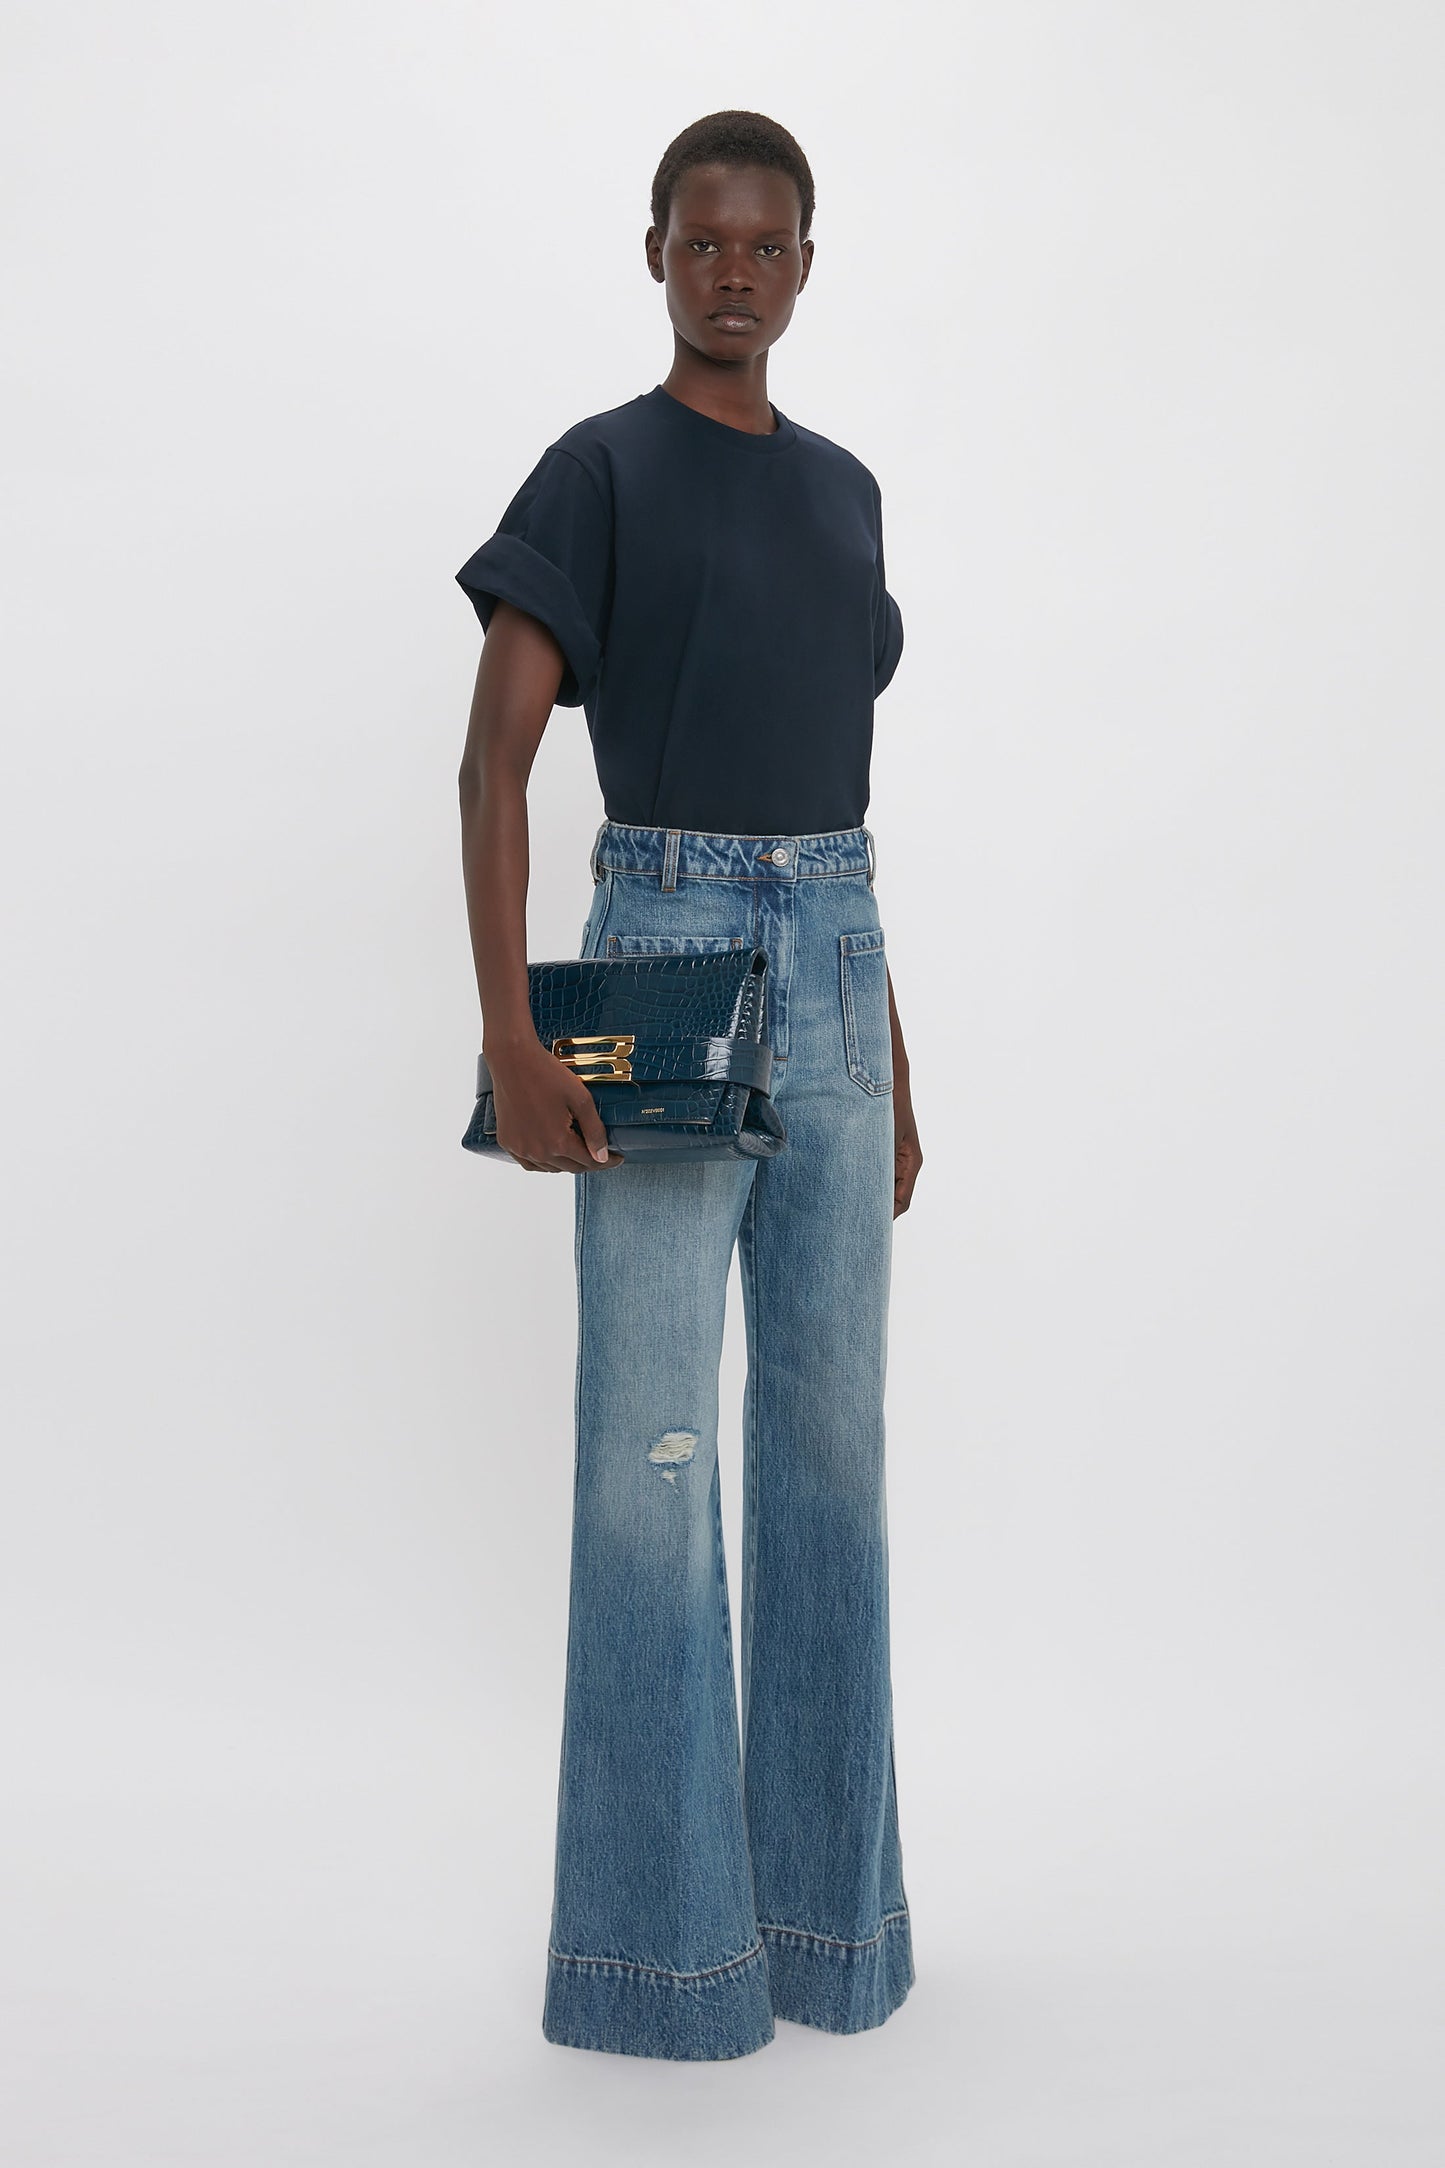 A person in a navy t-shirt and wide-leg distressed jeans holds a B Pouch Bag In Croc Effect Midnight Blue Leather by Victoria Beckham, standing against a plain white background.